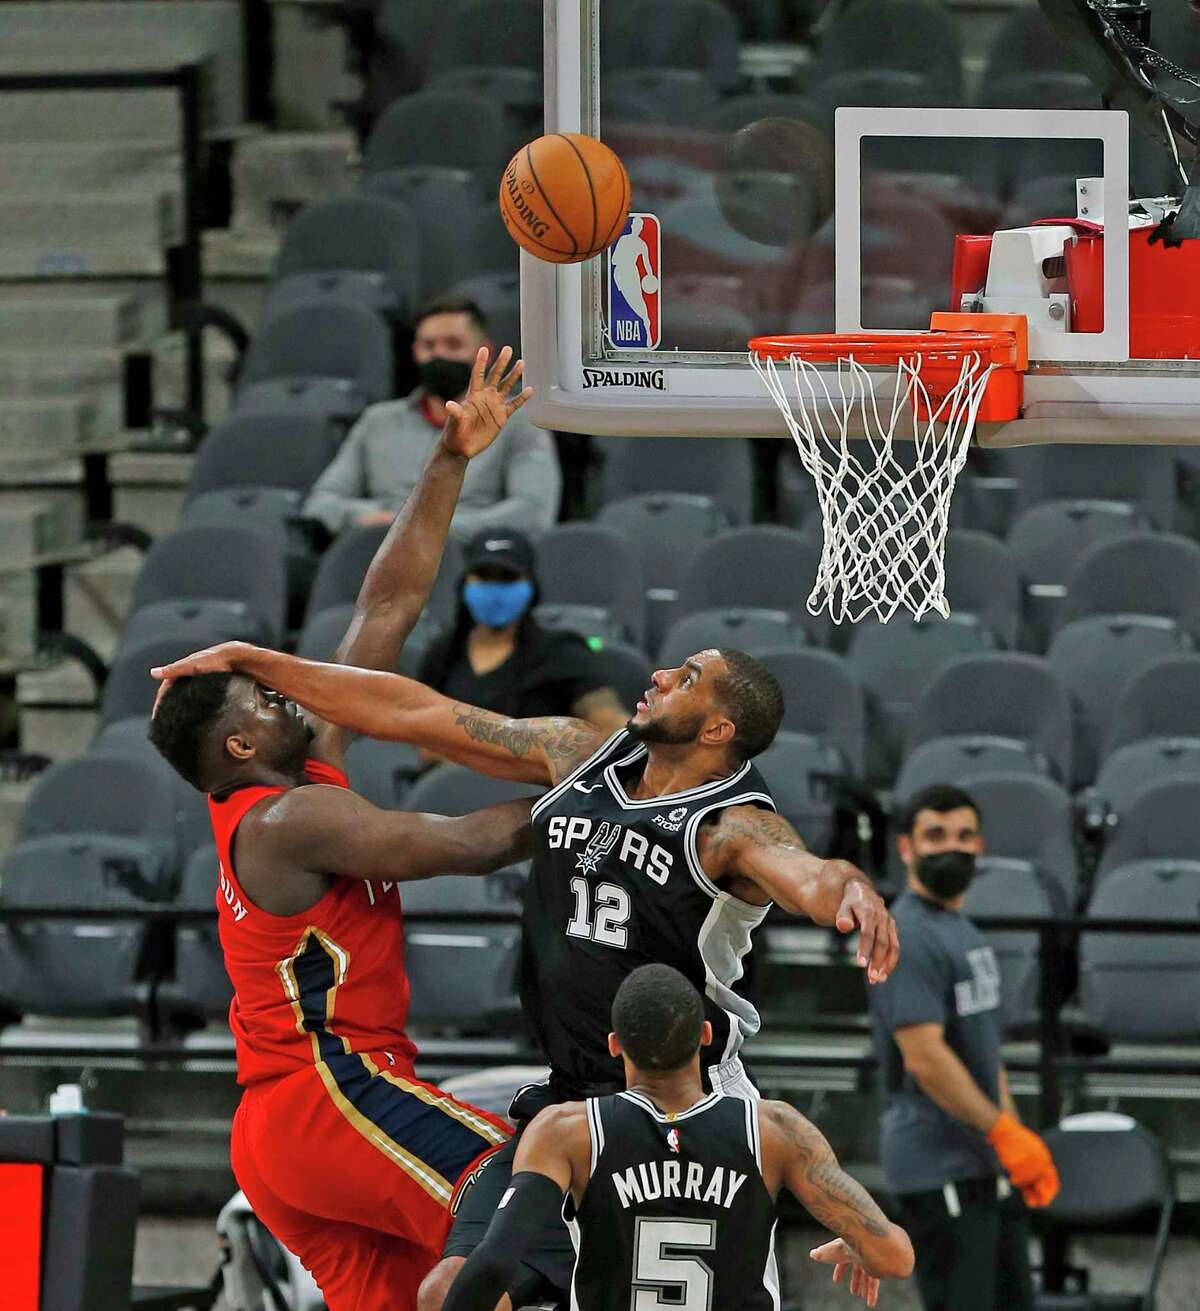 SAN ANTONIO, TX - FEBRUARY 27: LaMarcus Aldridge #12 of the San Antonio Spurs fouls Zion Williamson #1 of the New Orleans Pelicans in the first half at AT&T Center on February 27, 2021 in San Antonio, Texas. NOTE TO USER: User expressly acknowledges and agrees that , by downloading and or using this photograph, User is consenting to the terms and conditions of the Getty Images License Agreement. (Photo by Ronald Cortes/Getty Images)